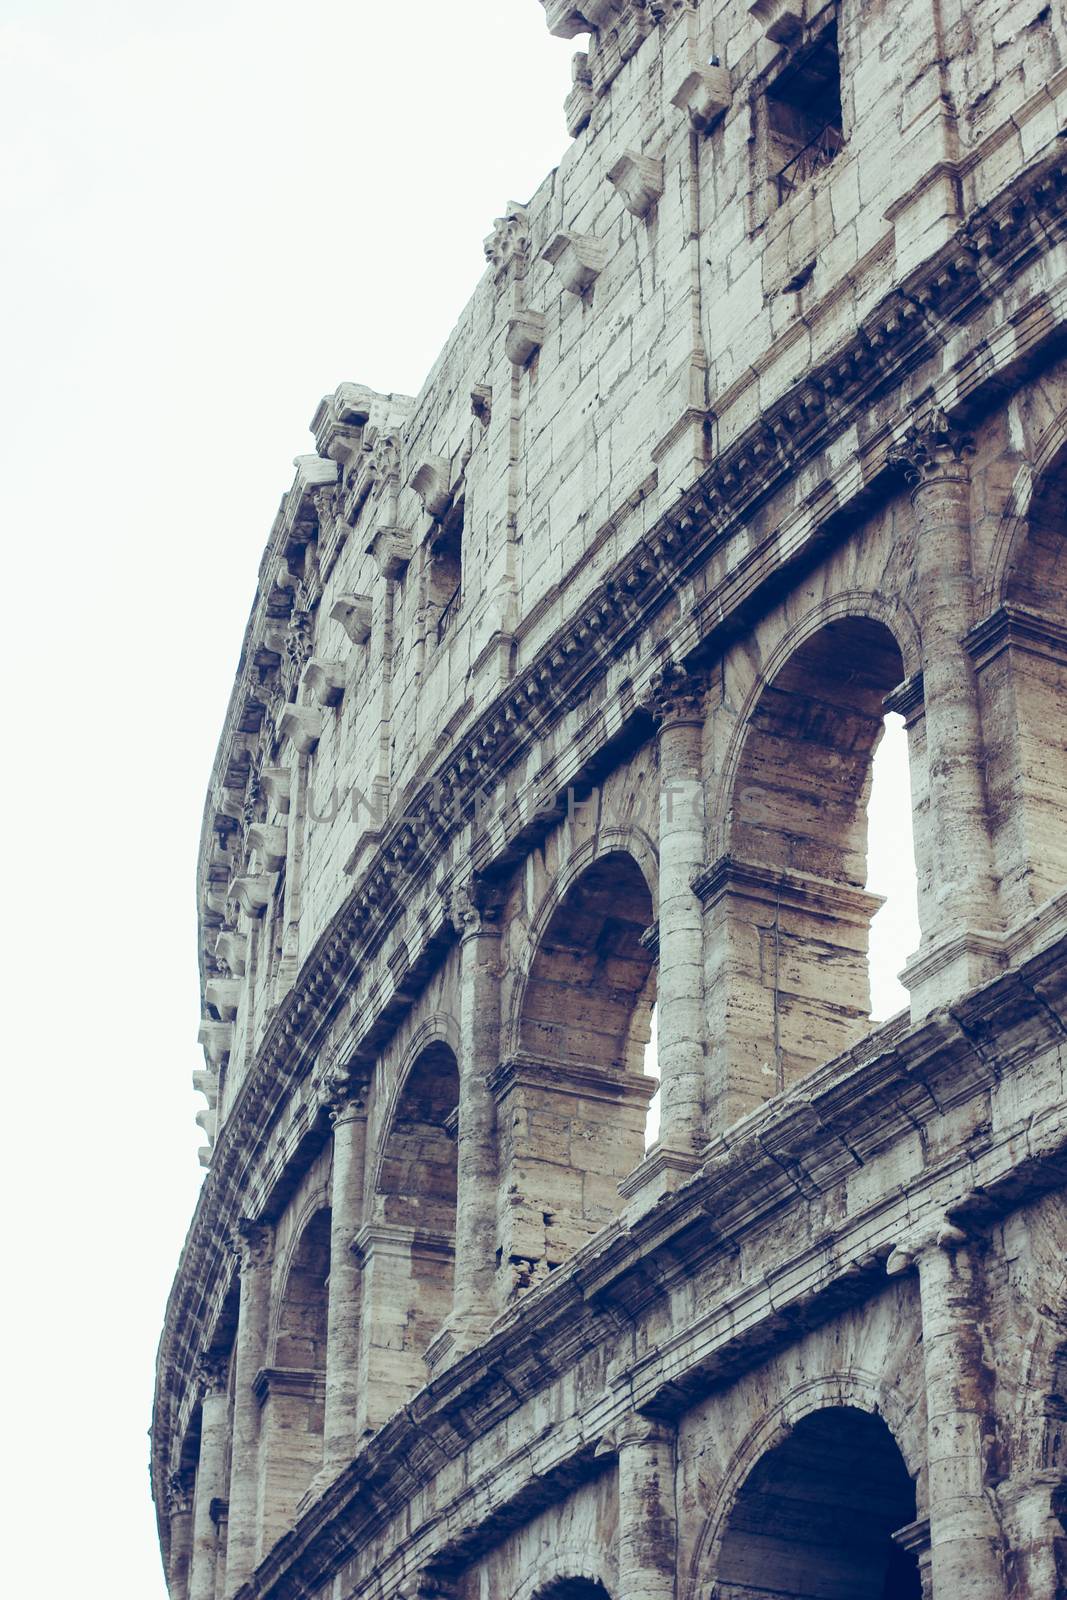 Colosseum, Rome Italy by sermax55